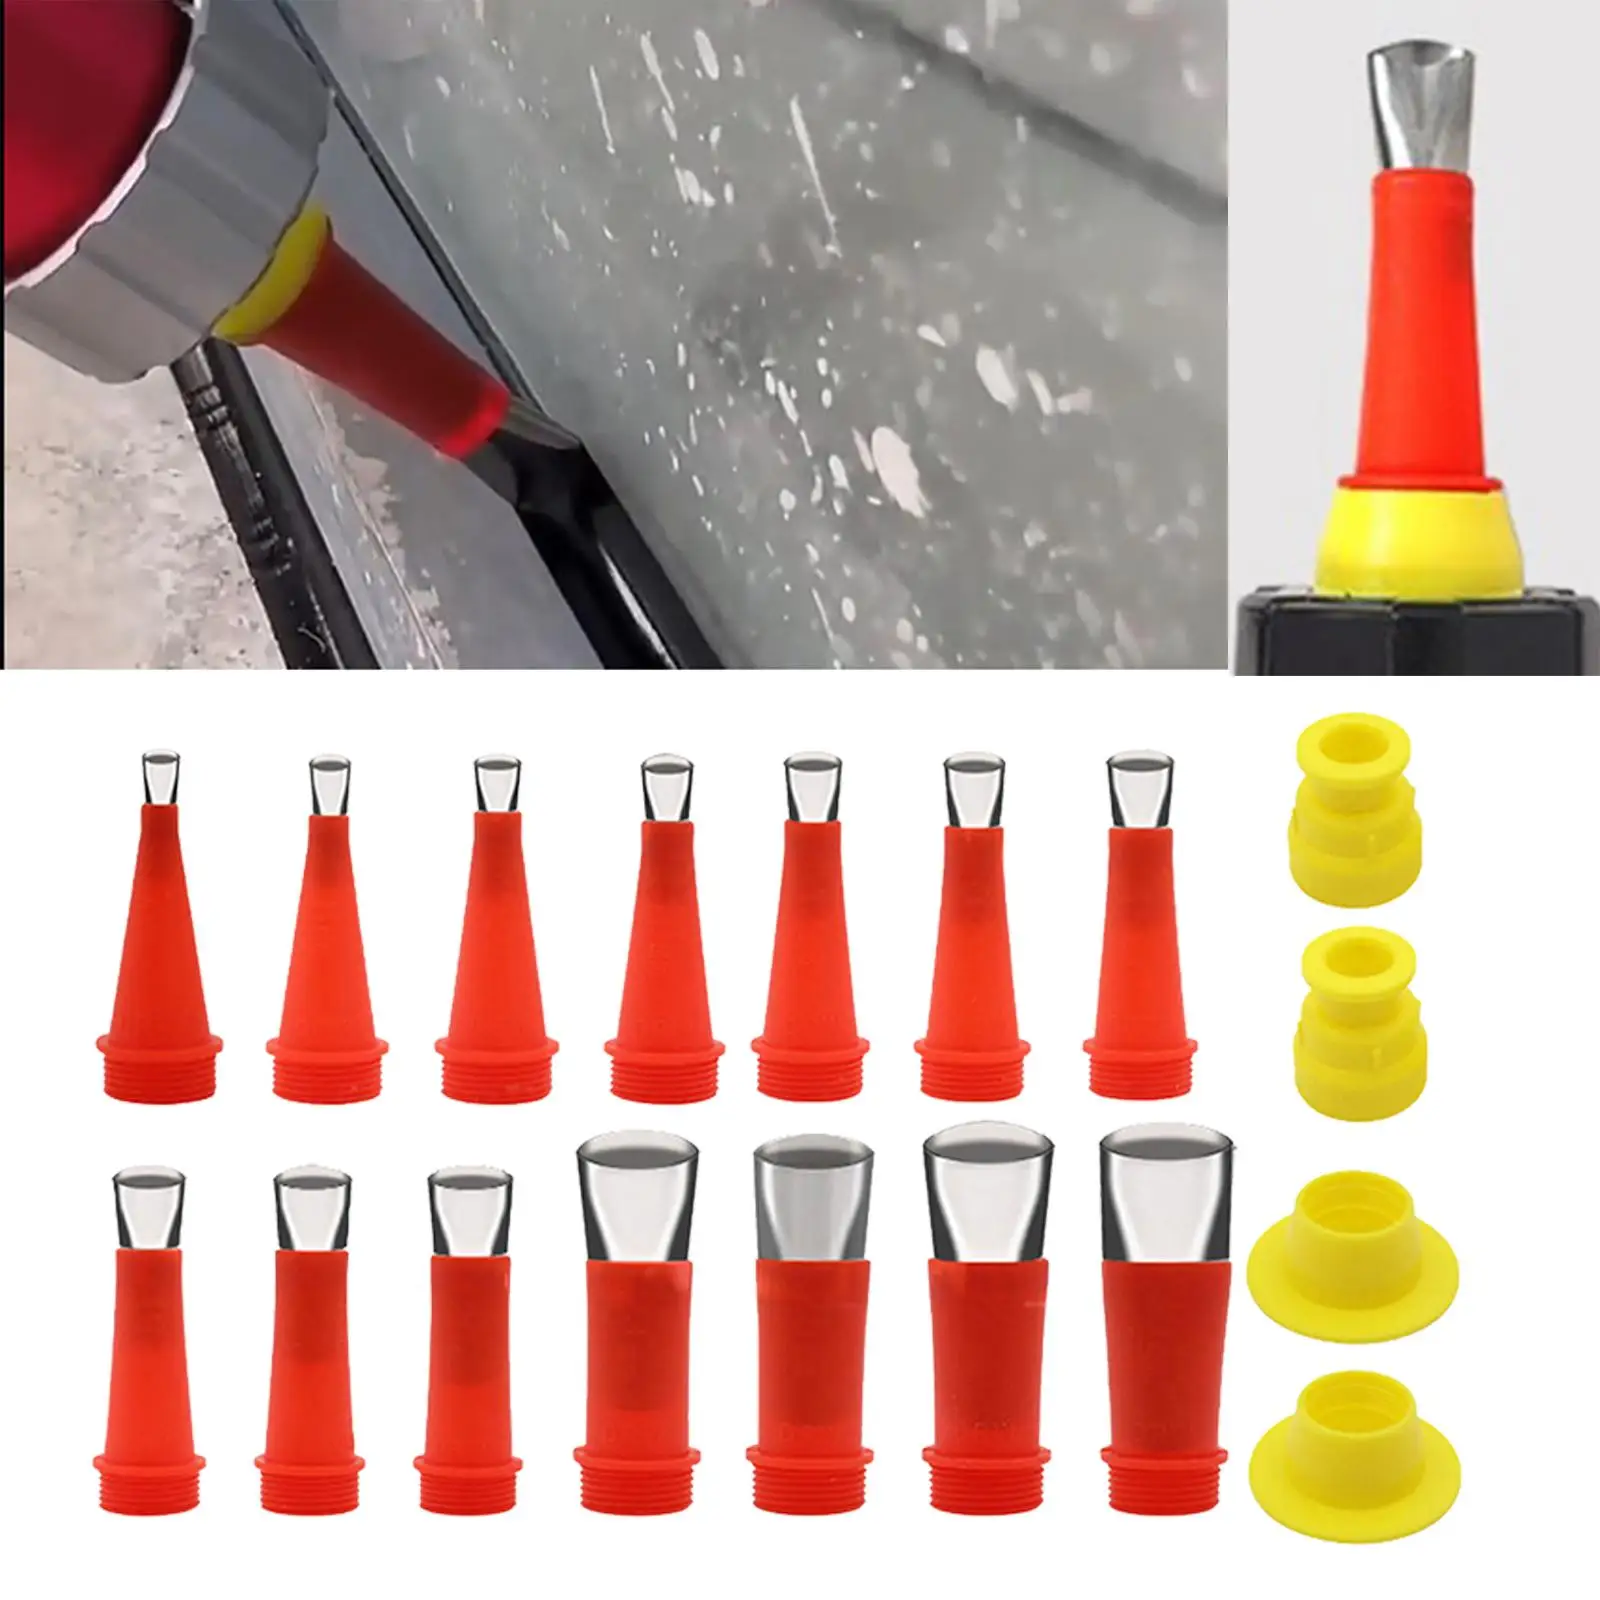 Stainless Steel Caulk Nozzle Applicator Filling Operation Tool for Doors